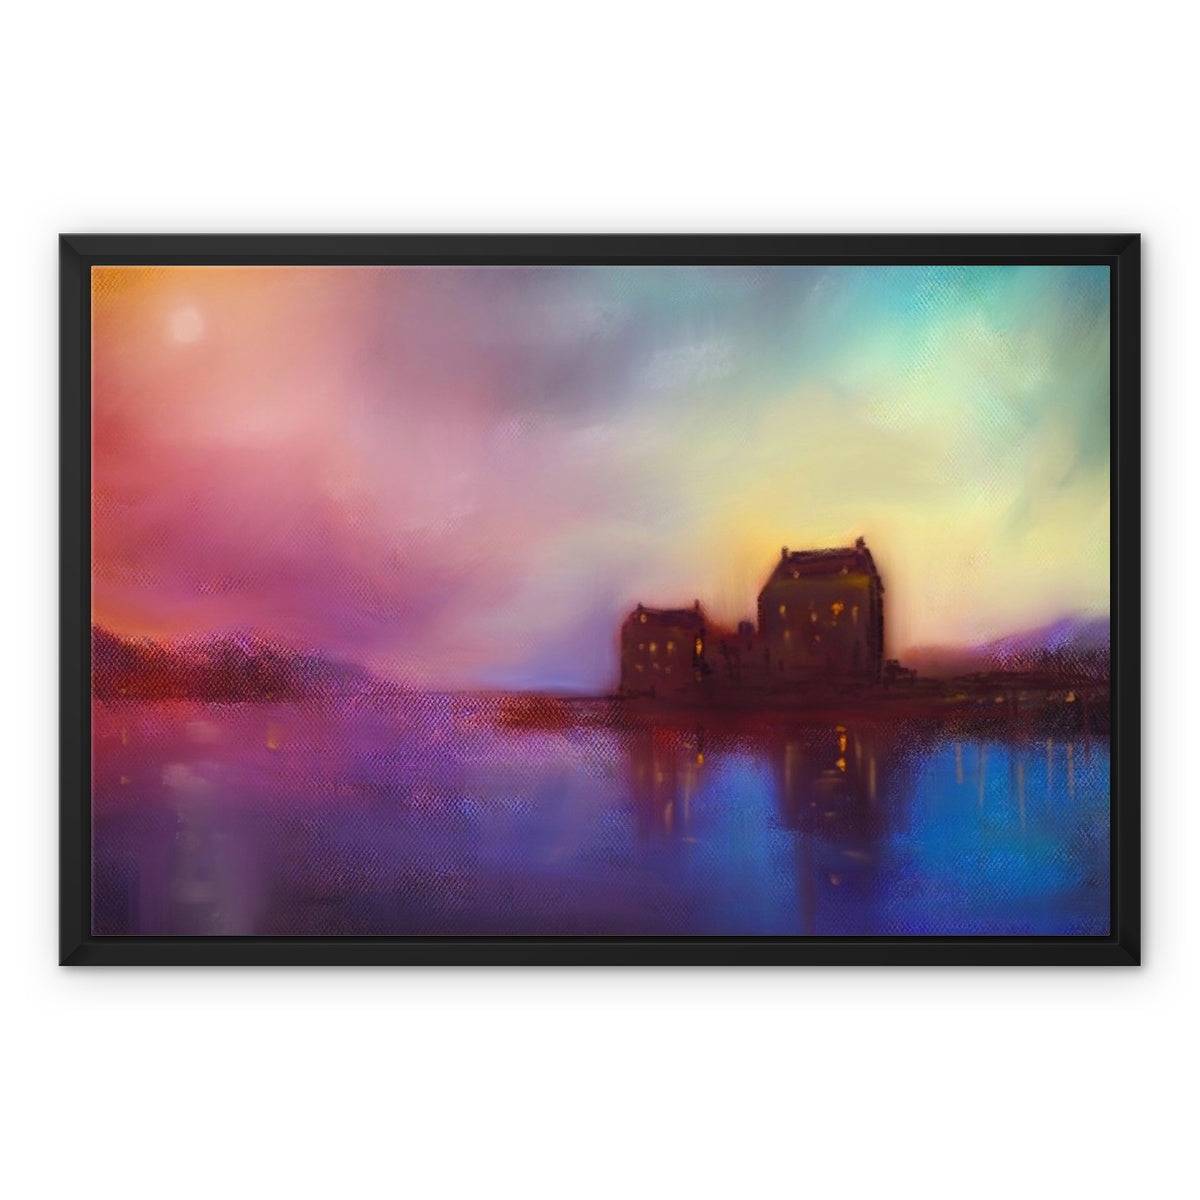 Eilean Donan Castle Sunset Painting | Framed Canvas From Scotland-Floating Framed Canvas Prints-Historic & Iconic Scotland Art Gallery-24"x18"-Black Frame-Paintings, Prints, Homeware, Art Gifts From Scotland By Scottish Artist Kevin Hunter